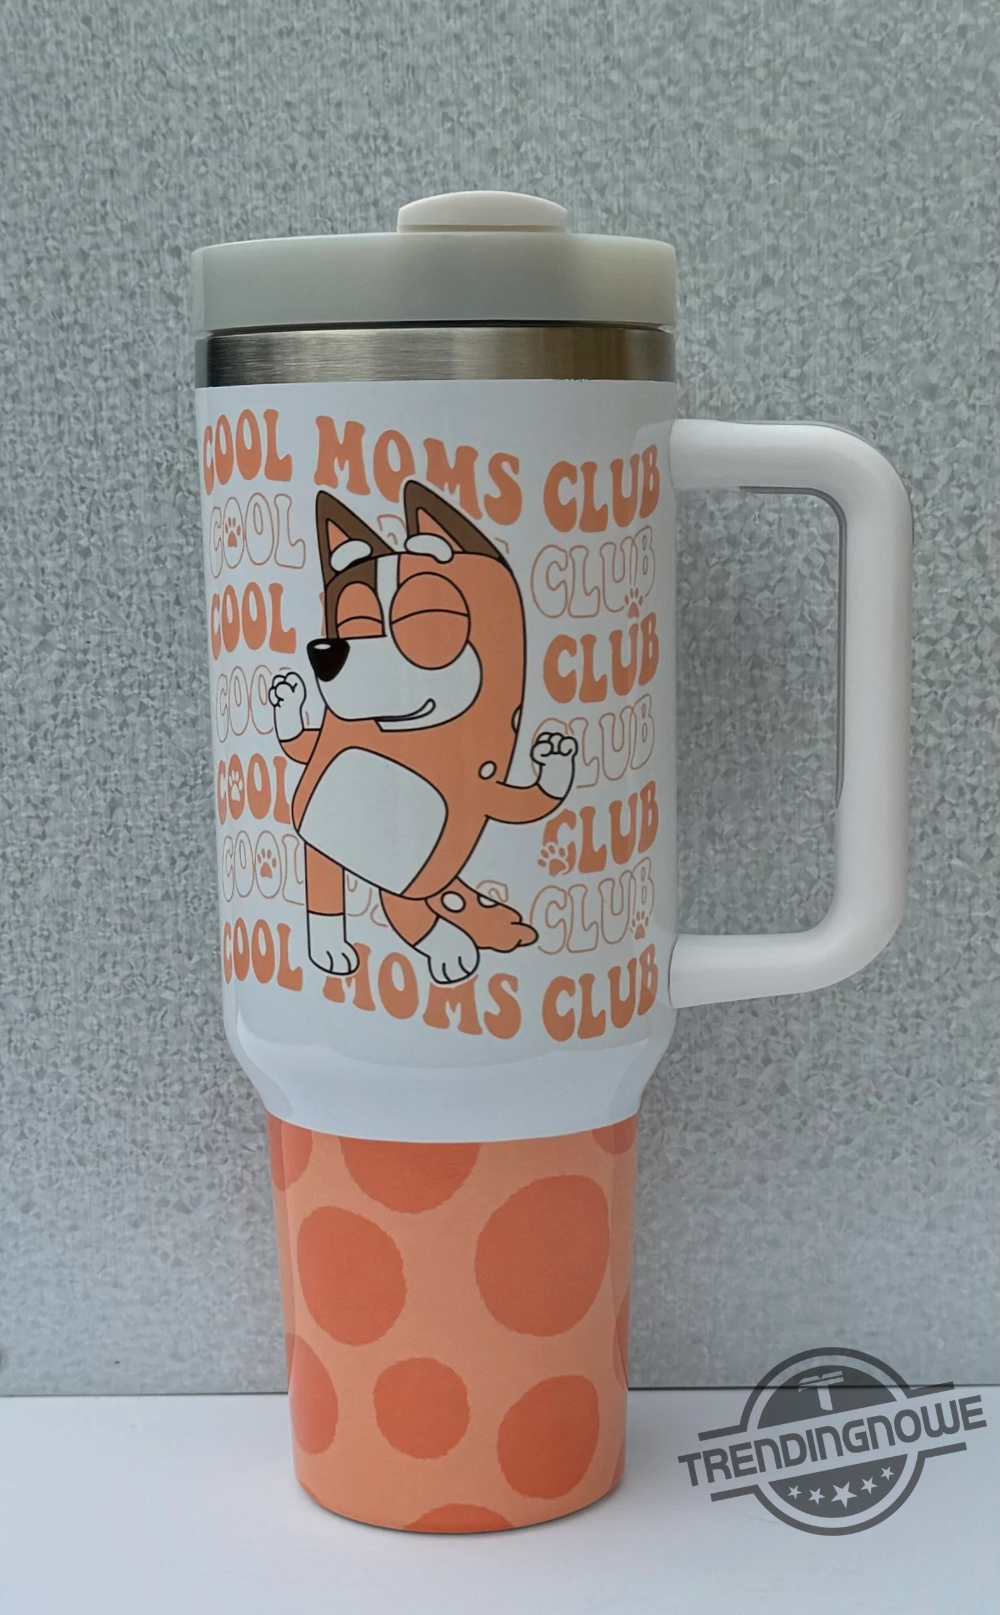 Bluey Stanley Tumbler Blue Dog Mum Cartoon Cool Moms Club Tumbler Mum Tumbler Blue Heeler Stanley Cup Mothers Day Gift